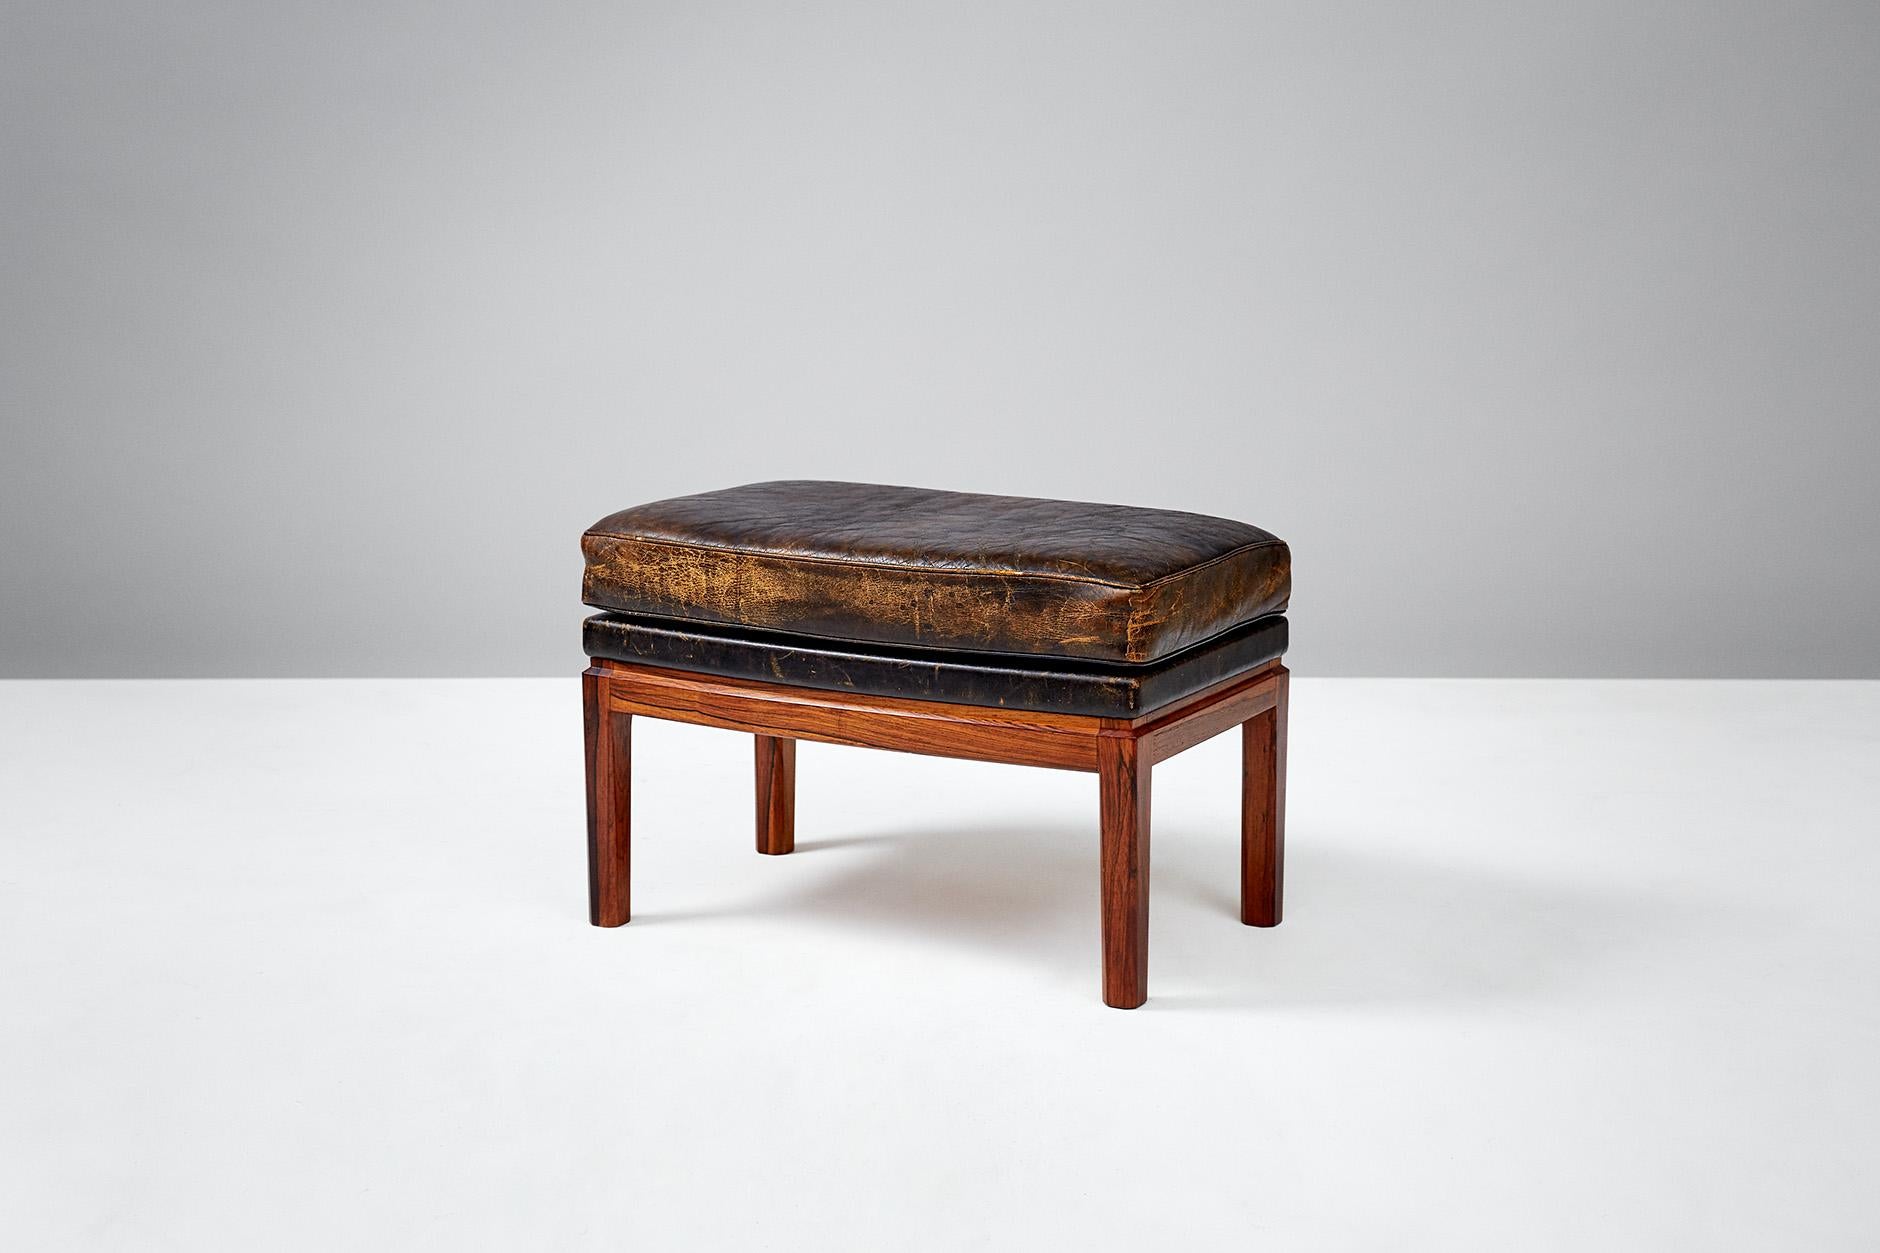 Erik Kolling Andersen

Leather ottoman, 1953.

Patinated leather ottoman on curved Brazilian rosewood frame. Produced by master Danish cabinetmaker Peder Pedersen. 

Model first presented at The Copenhagen Cabinetmakers' Guild Exhibition at